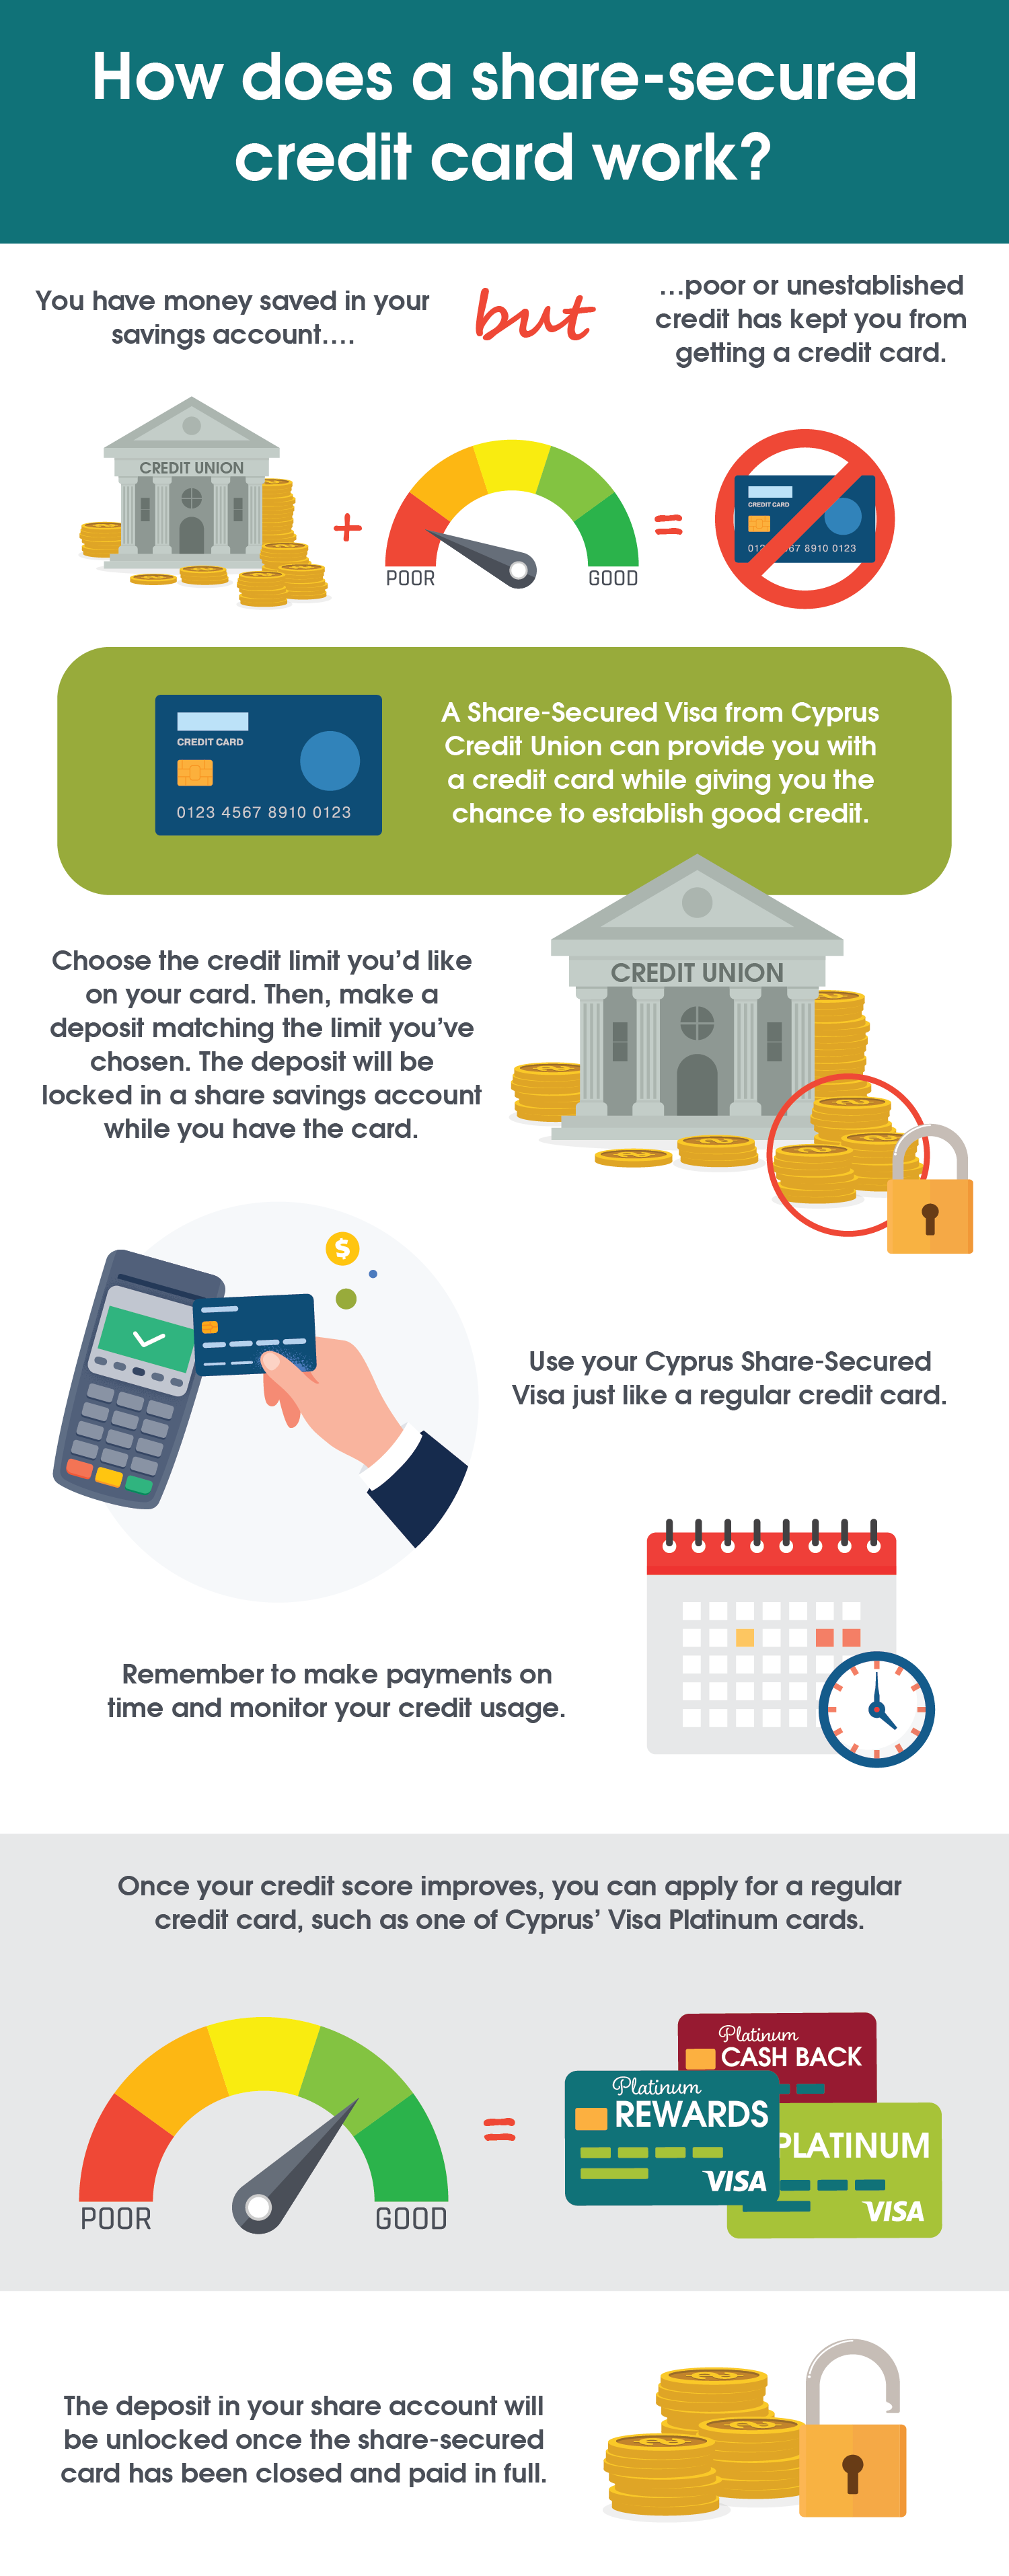 Shared-secured visa card infrographic